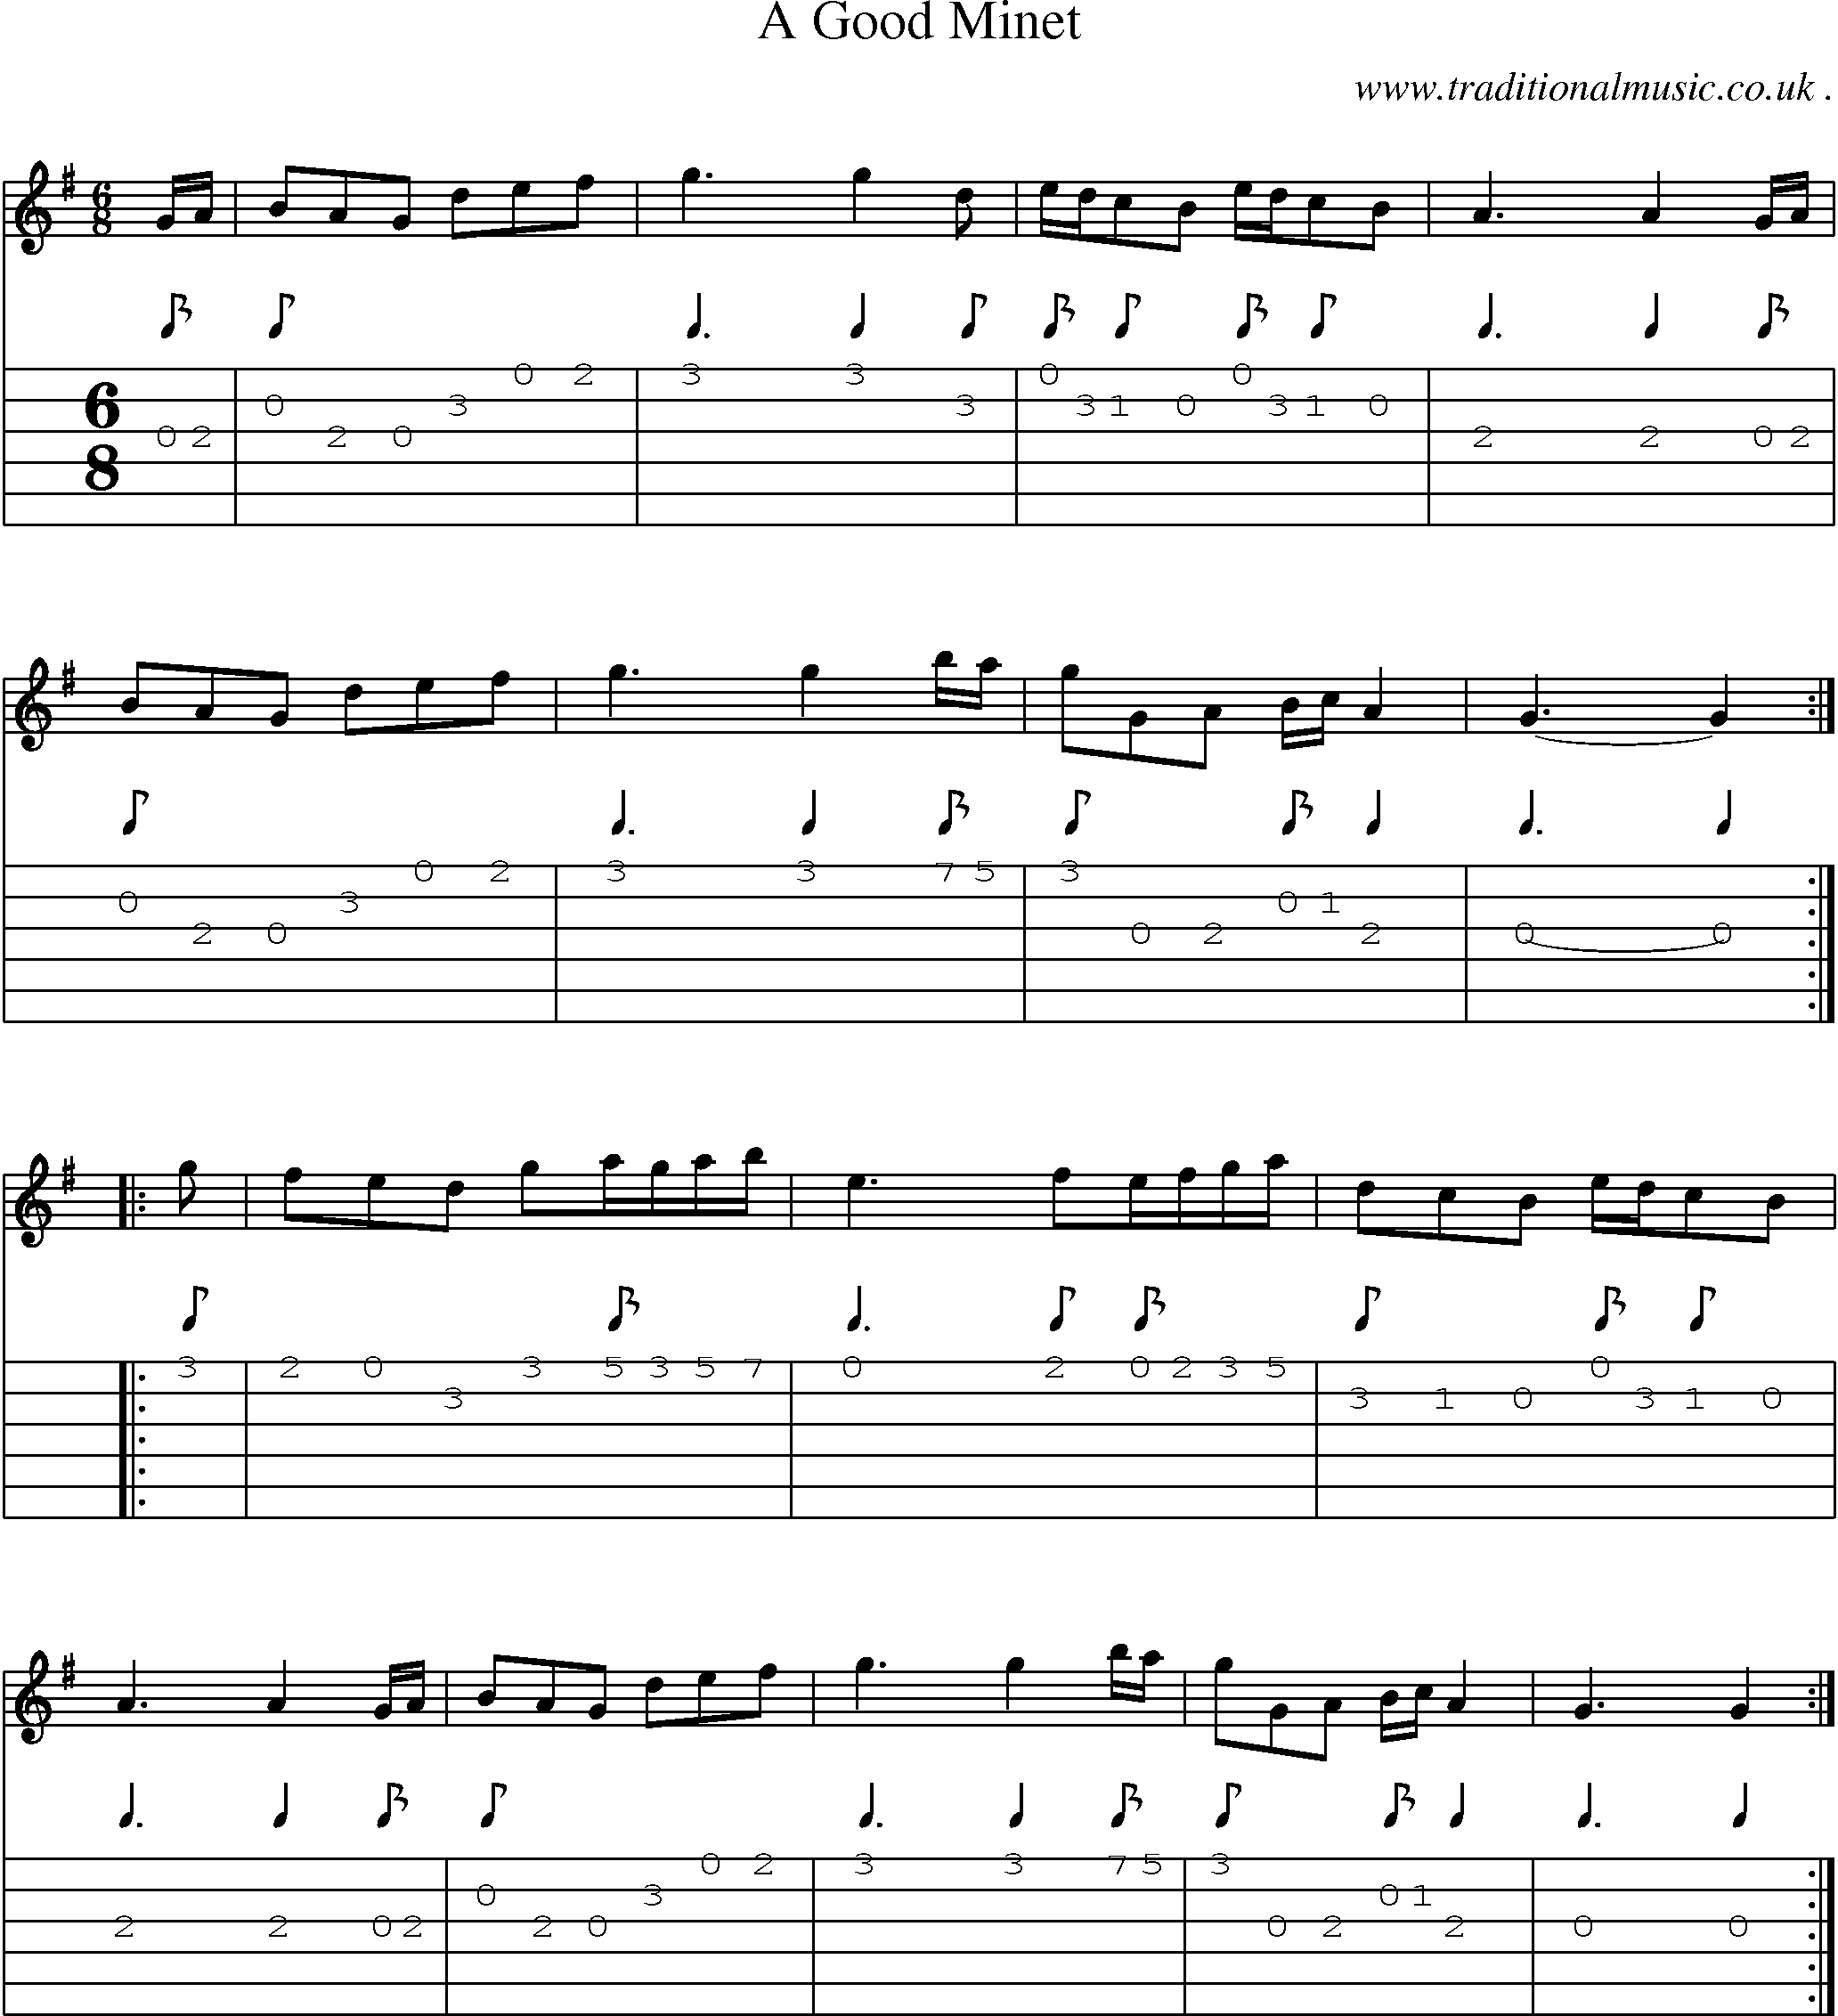 Sheet-Music and Guitar Tabs for A Good Minet